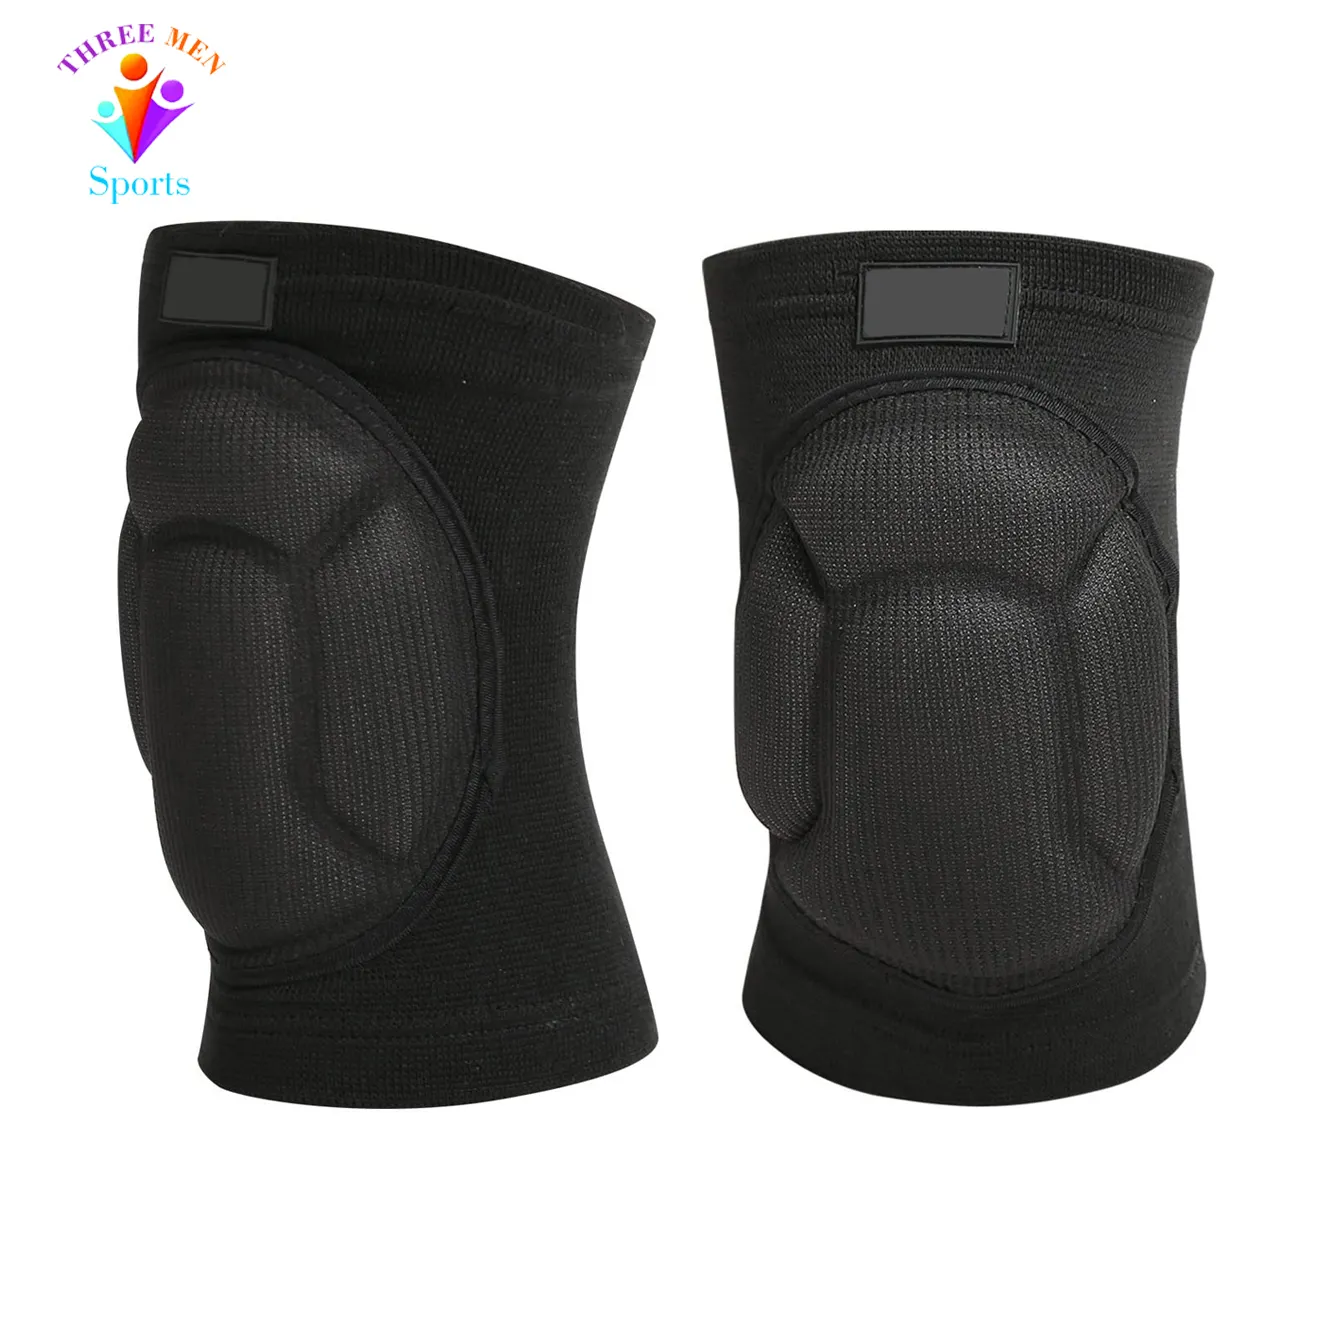 Martial Arts Boxing Knee Pads Elastic Soft Protective Sponge MMA Support For Joint Training Sports Bandage Knee Pads